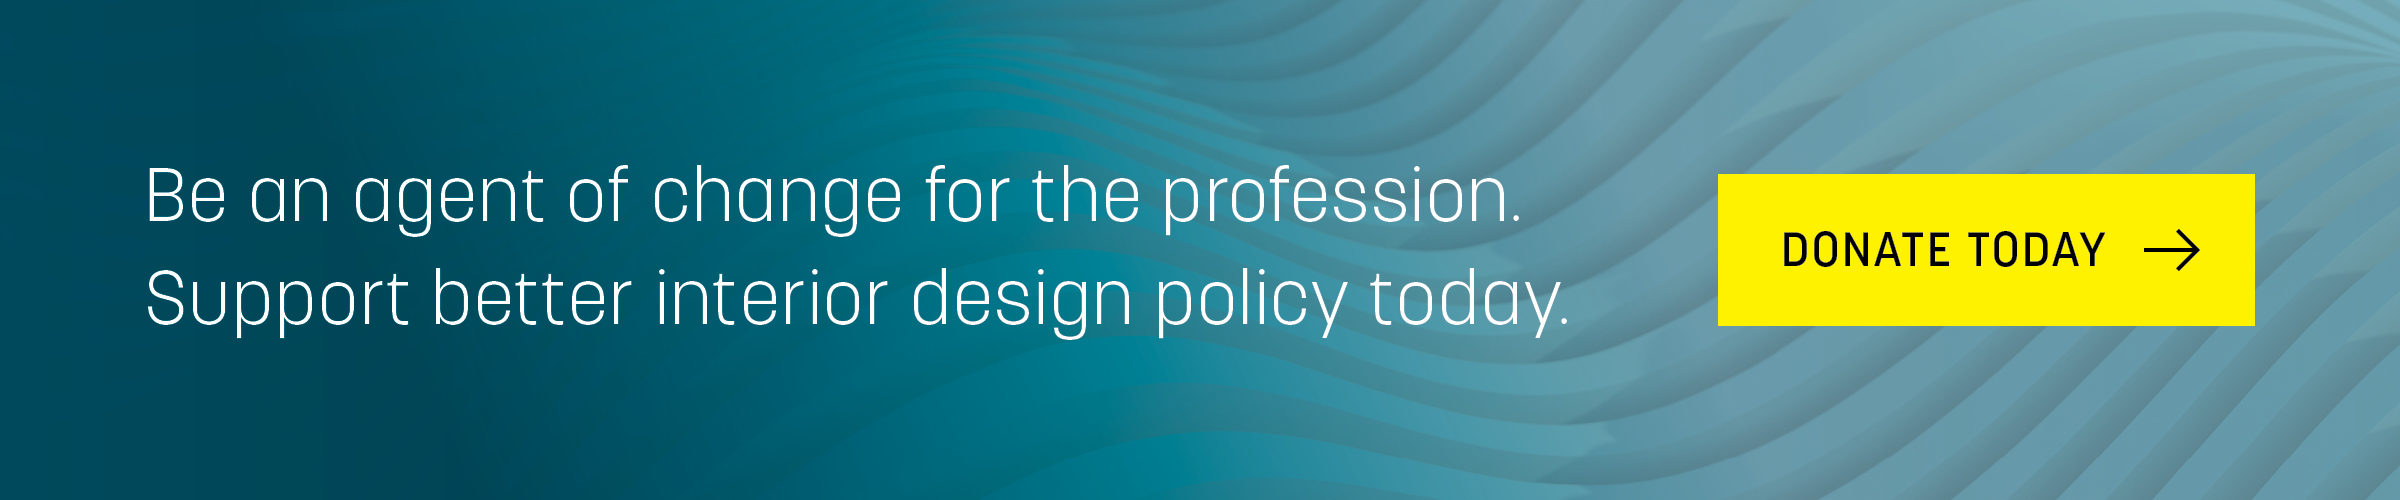 Be an agent of change for the profession. Support better interior design policy today. Donate today button.